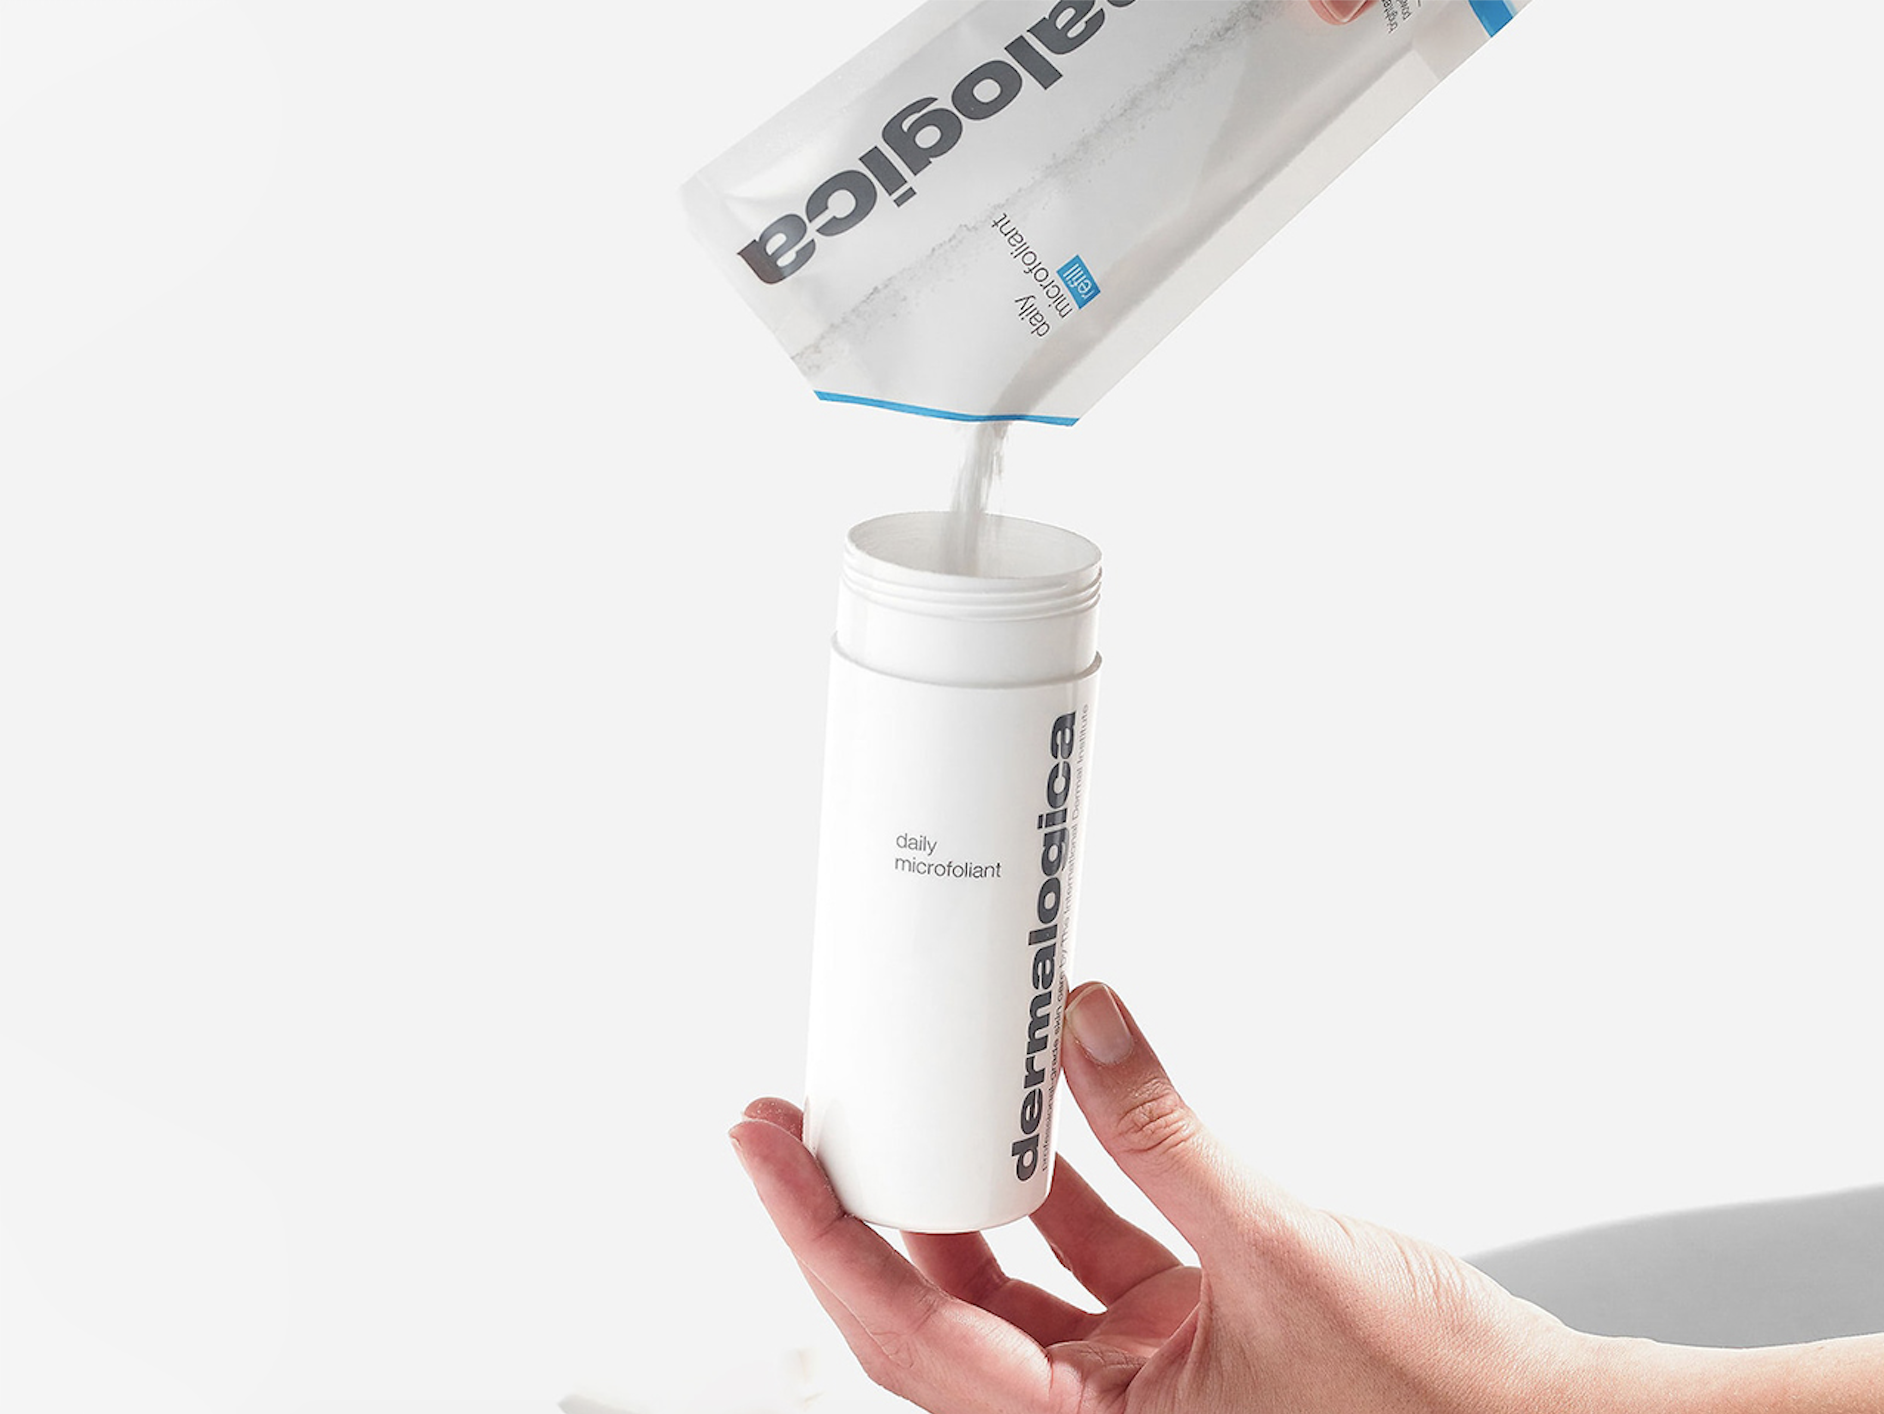 A hand holding a bottle of Dermalogica's Daily Microfoliant as it is being refilled, for an article on the best refillable beauty products